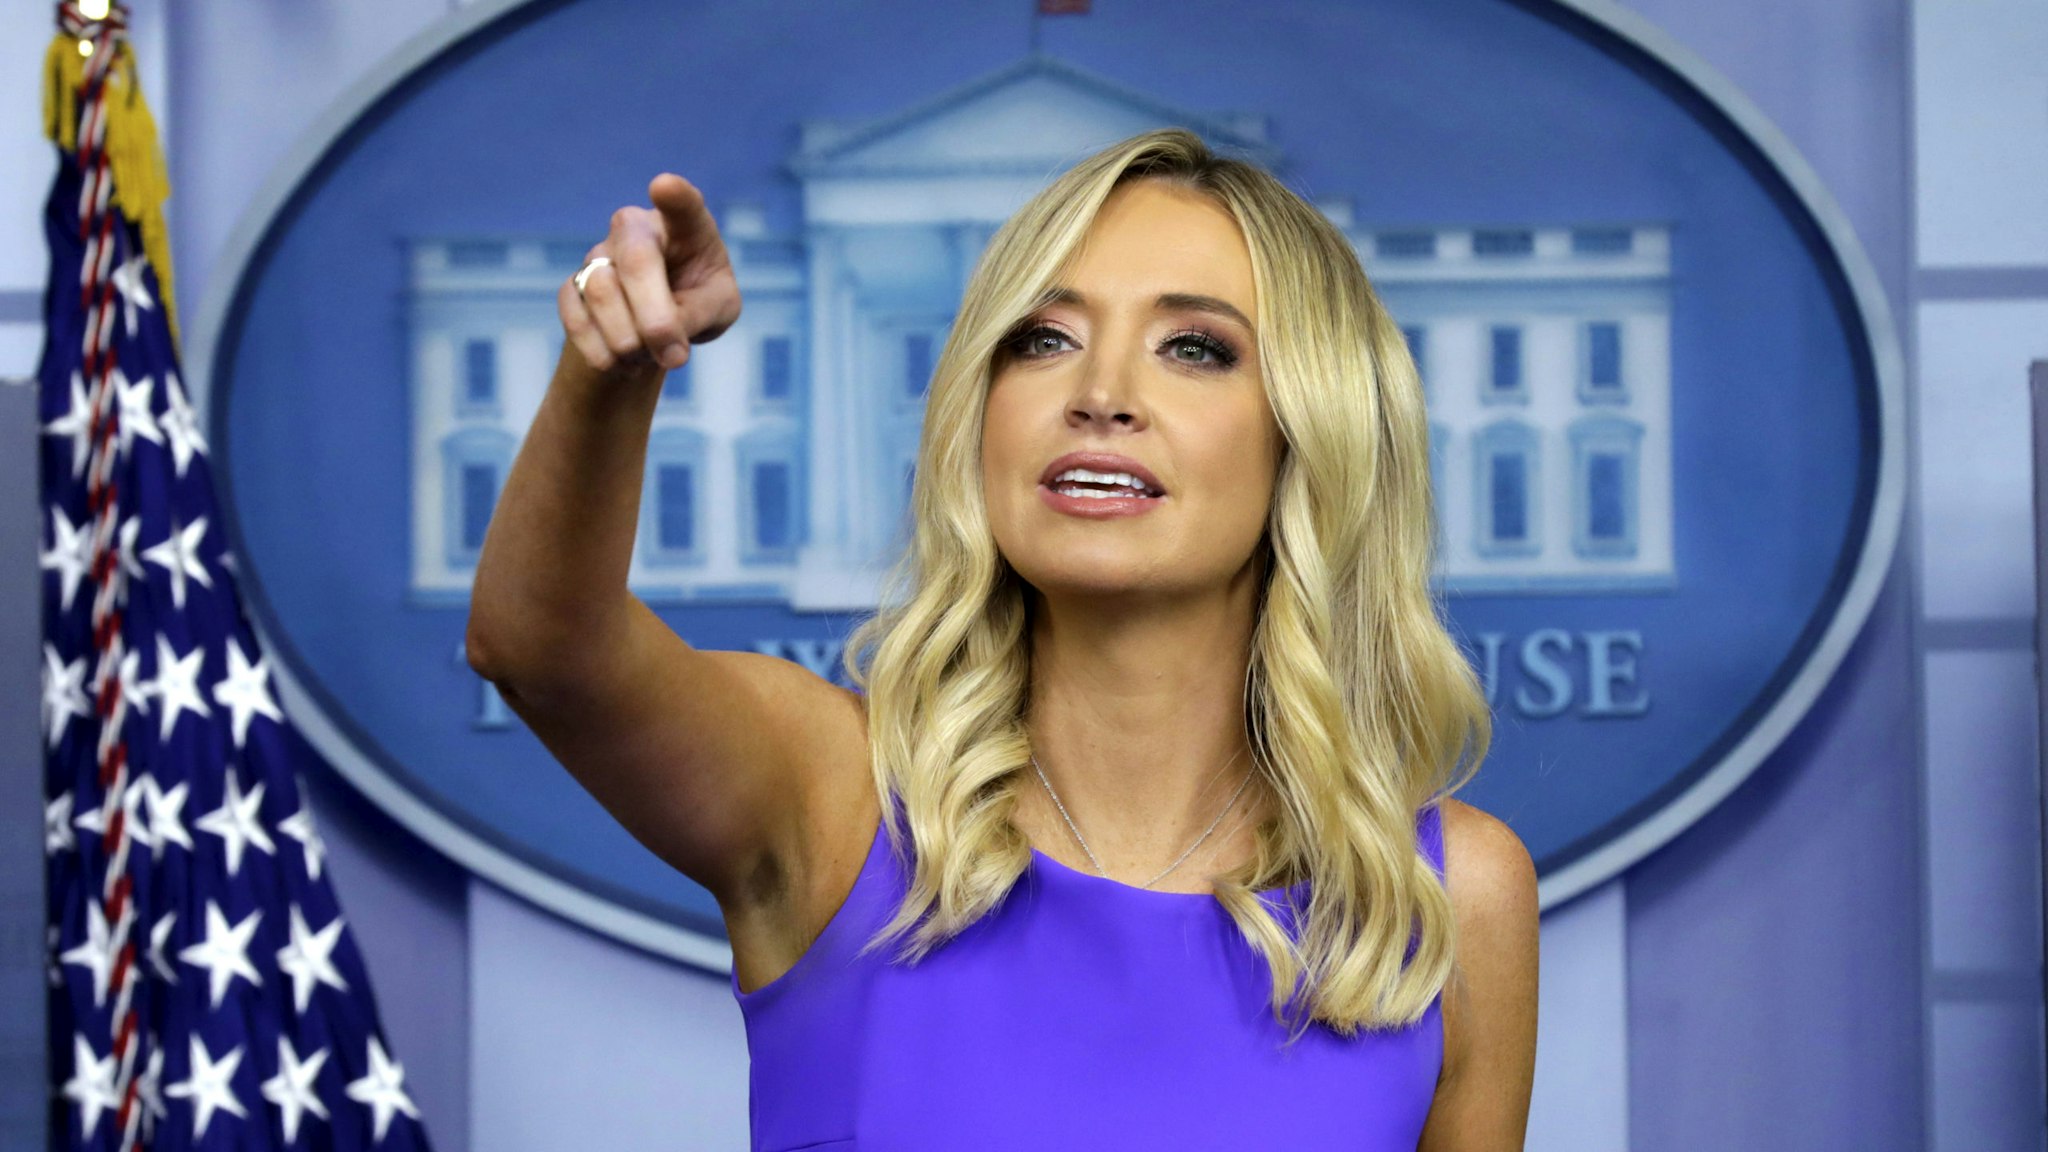 Kayleigh McEnany, White House press secretary, speaks during a briefing in Washington, D.C., U.S., on Thursday, May 28, 2020. President Trump plans to sign an executive order on social media on Thursday afternoon, perhaps before 5pm, McEnany said.